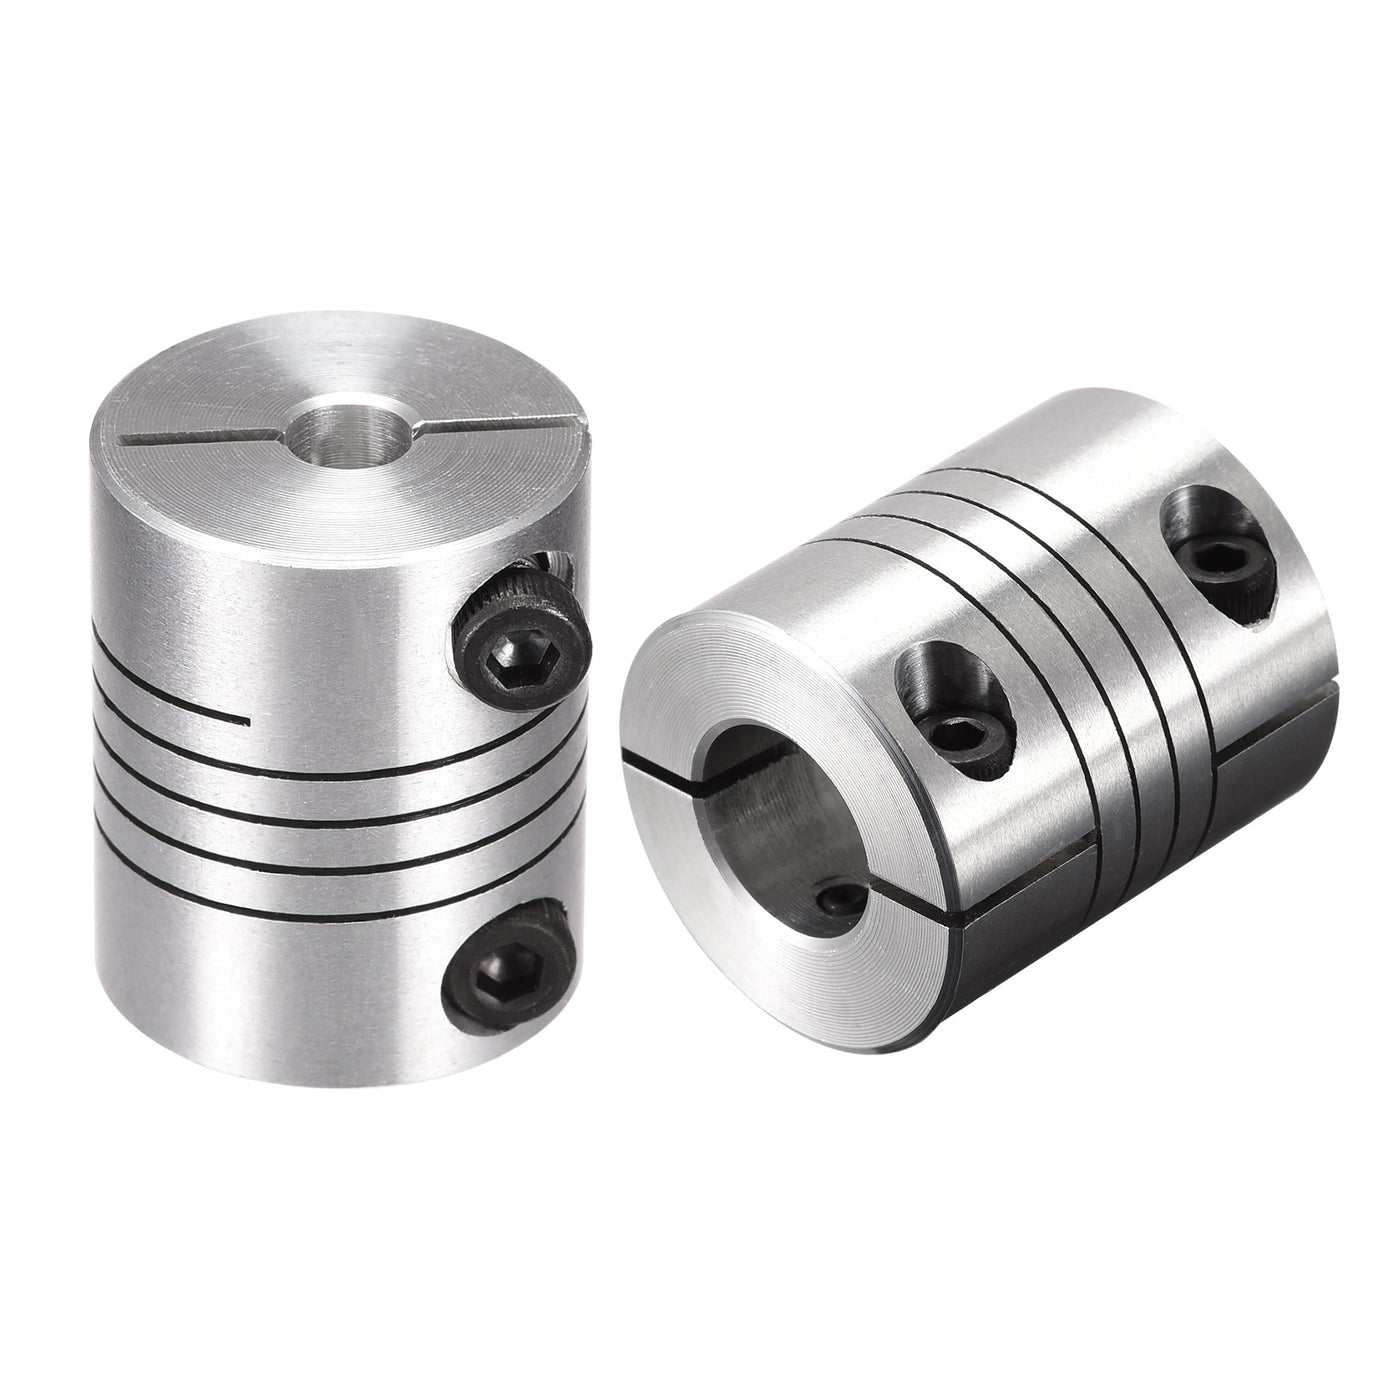 uxcell Uxcell 2PCS Motor Shaft 5mm to 12mm Helical Beam Coupler Coupling 25mm Dia 30mm Length